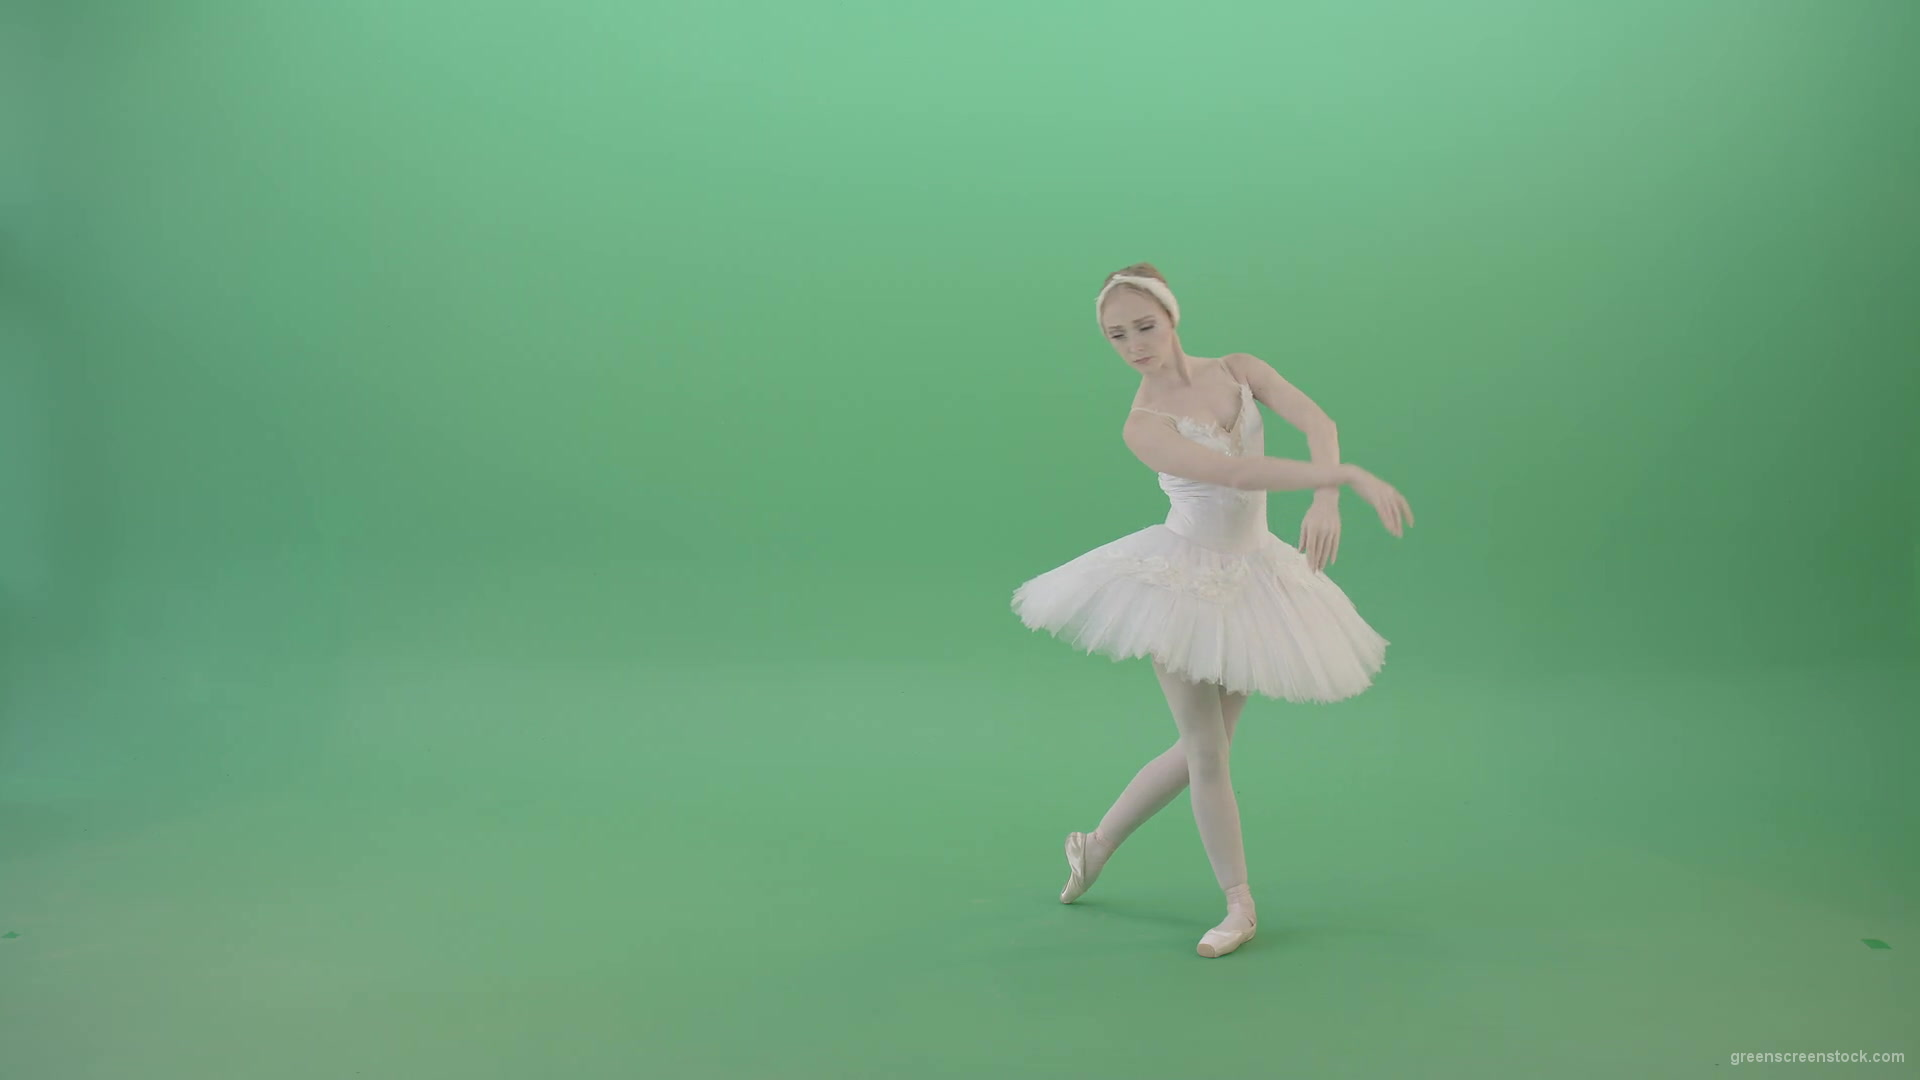 Fashion-snow-white-ballet-dancing-girl-showing-swan-lake-dance-isolated-on-Green-Screen-4K-Video-Footage-1920_009 Green Screen Stock